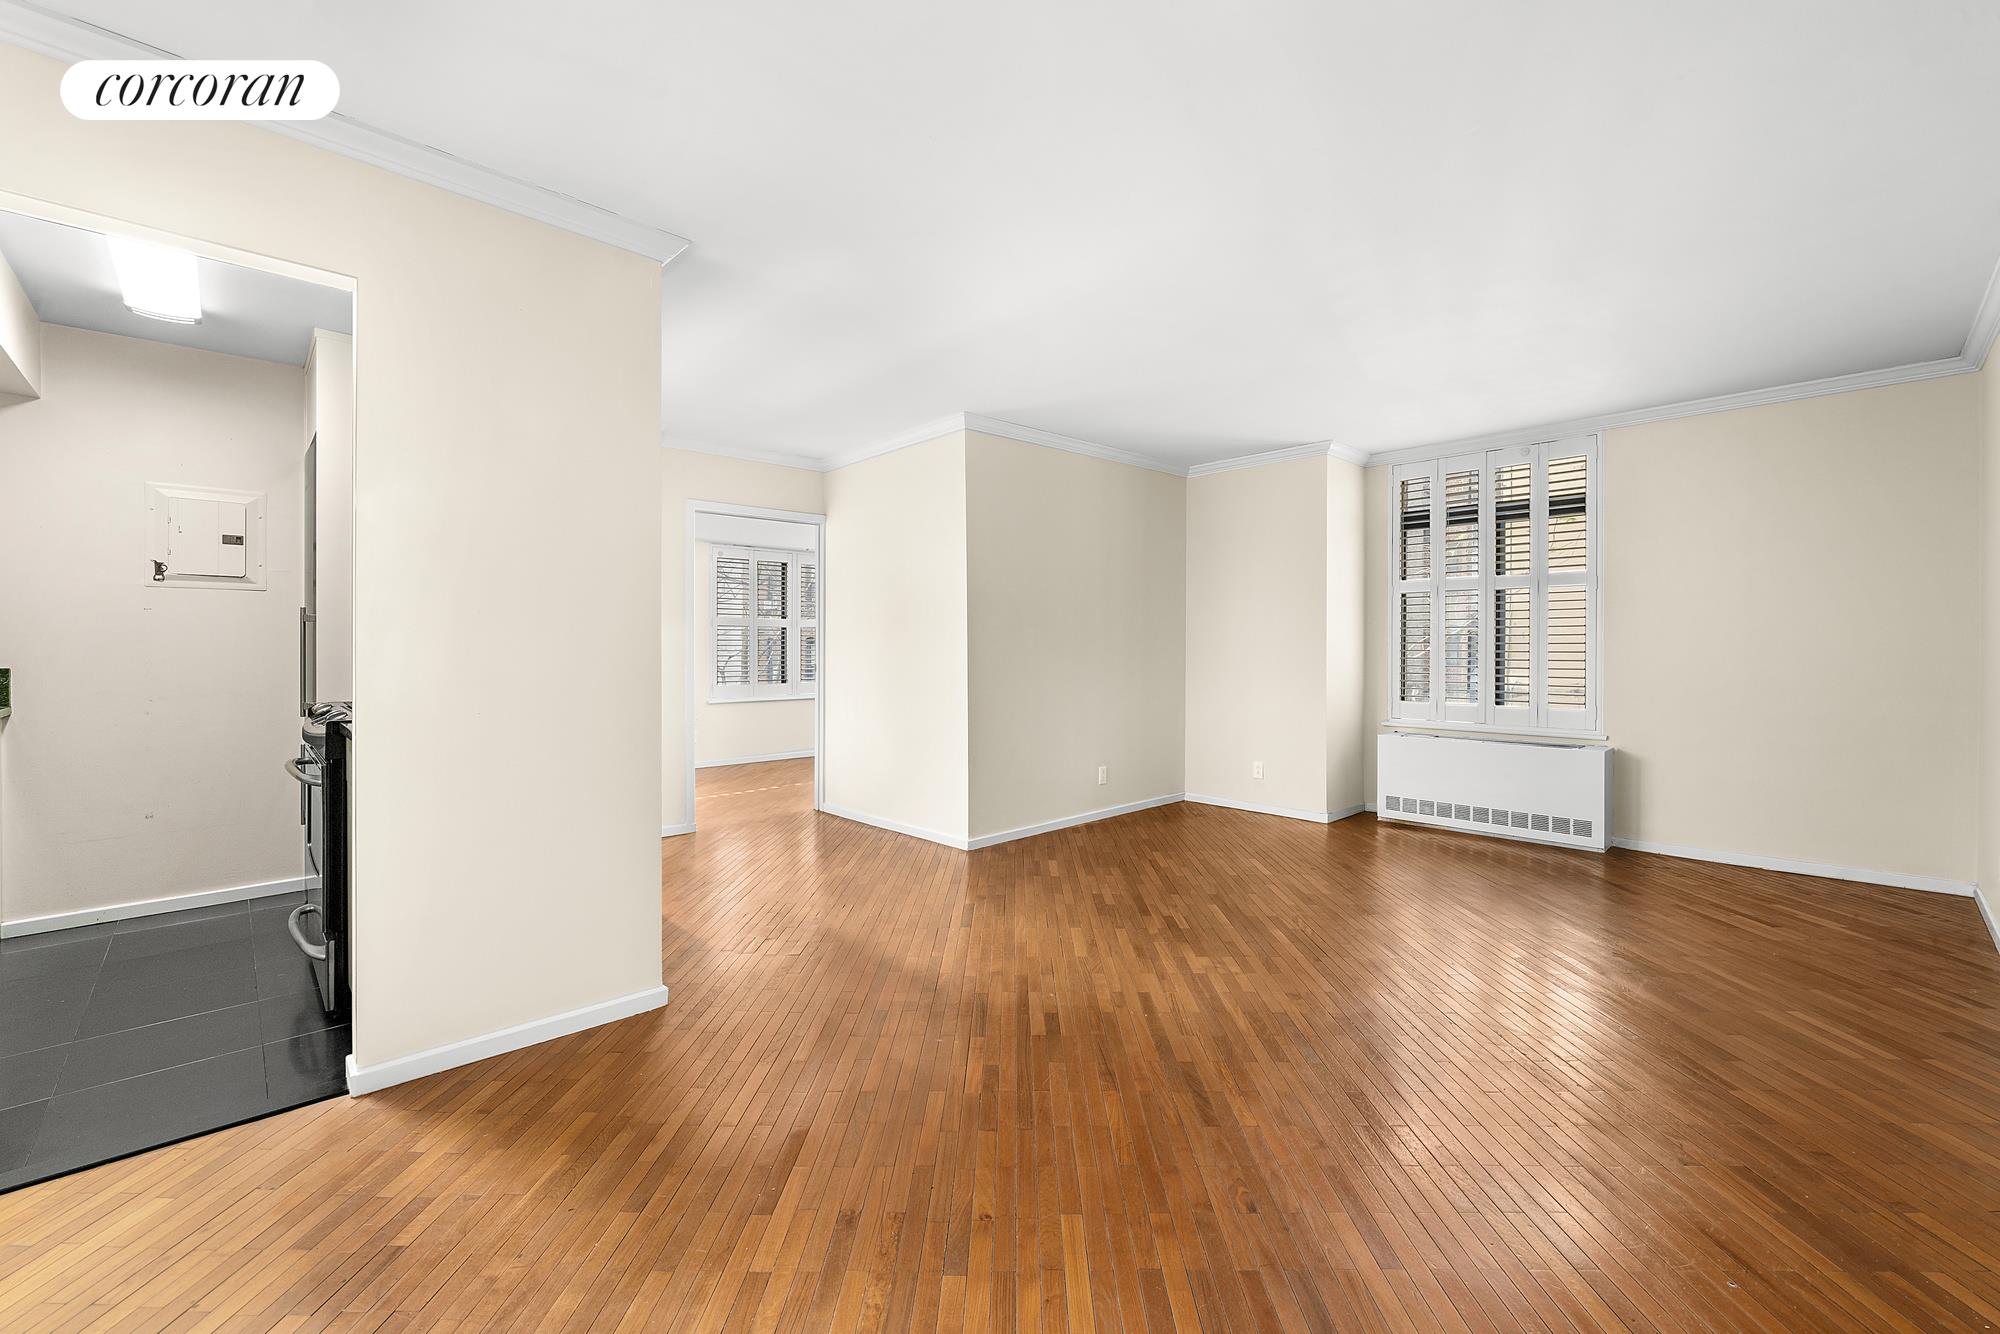 400 East 70th Street 207, Lenox Hill, Upper East Side, NYC - 1 Bedrooms  
1 Bathrooms  
3 Rooms - 